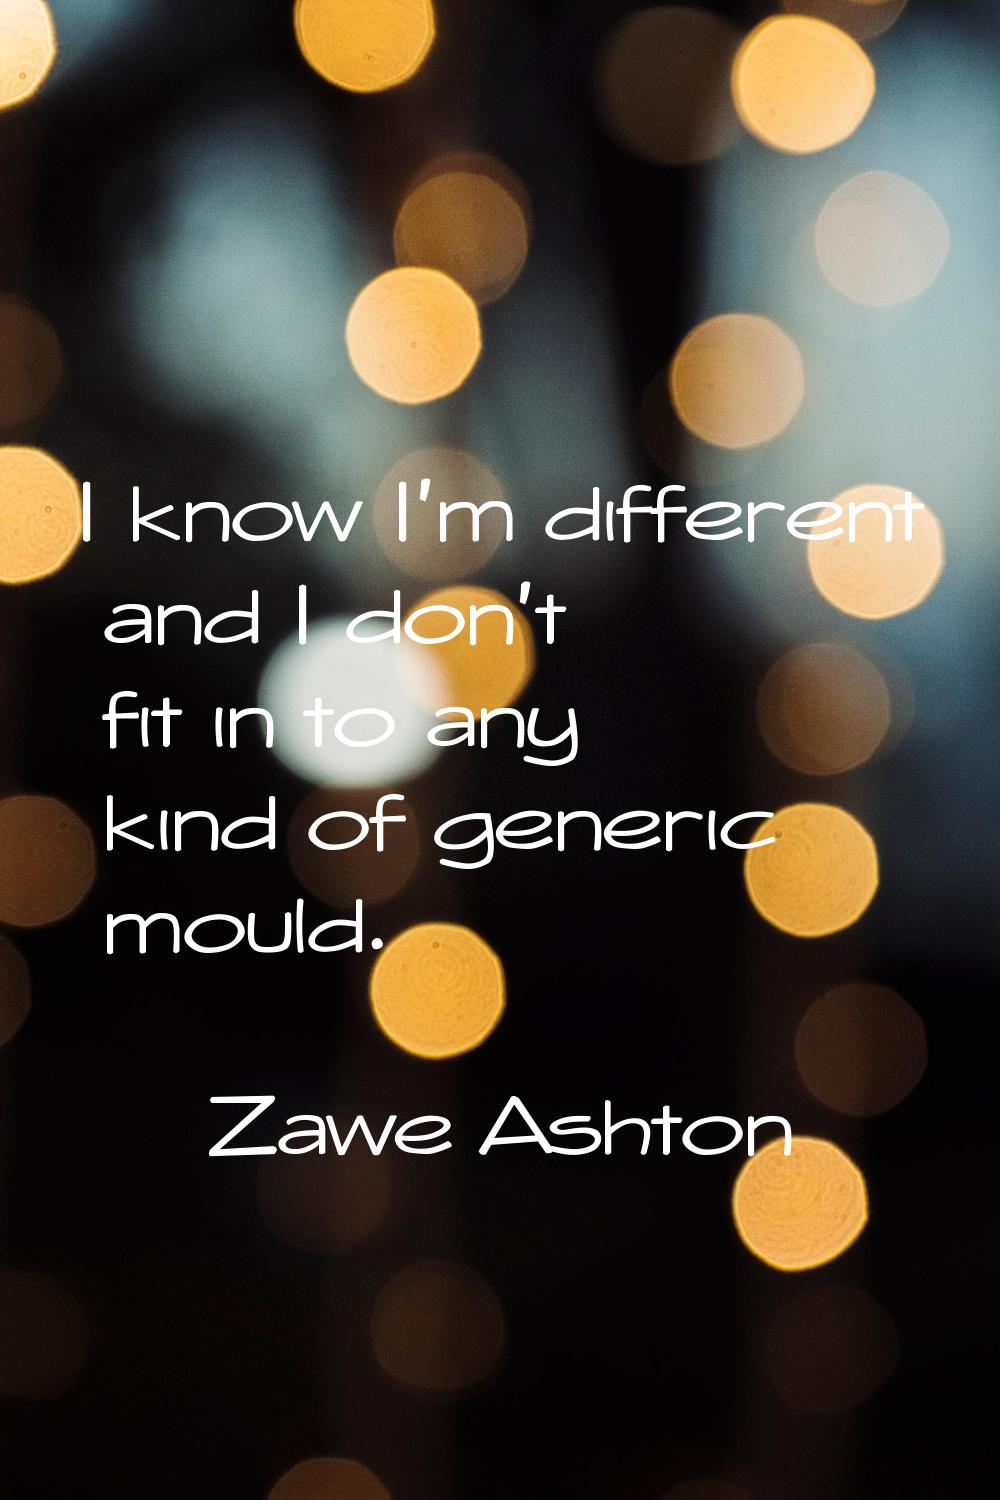 I know I'm different and I don't fit in to any kind of generic mould.